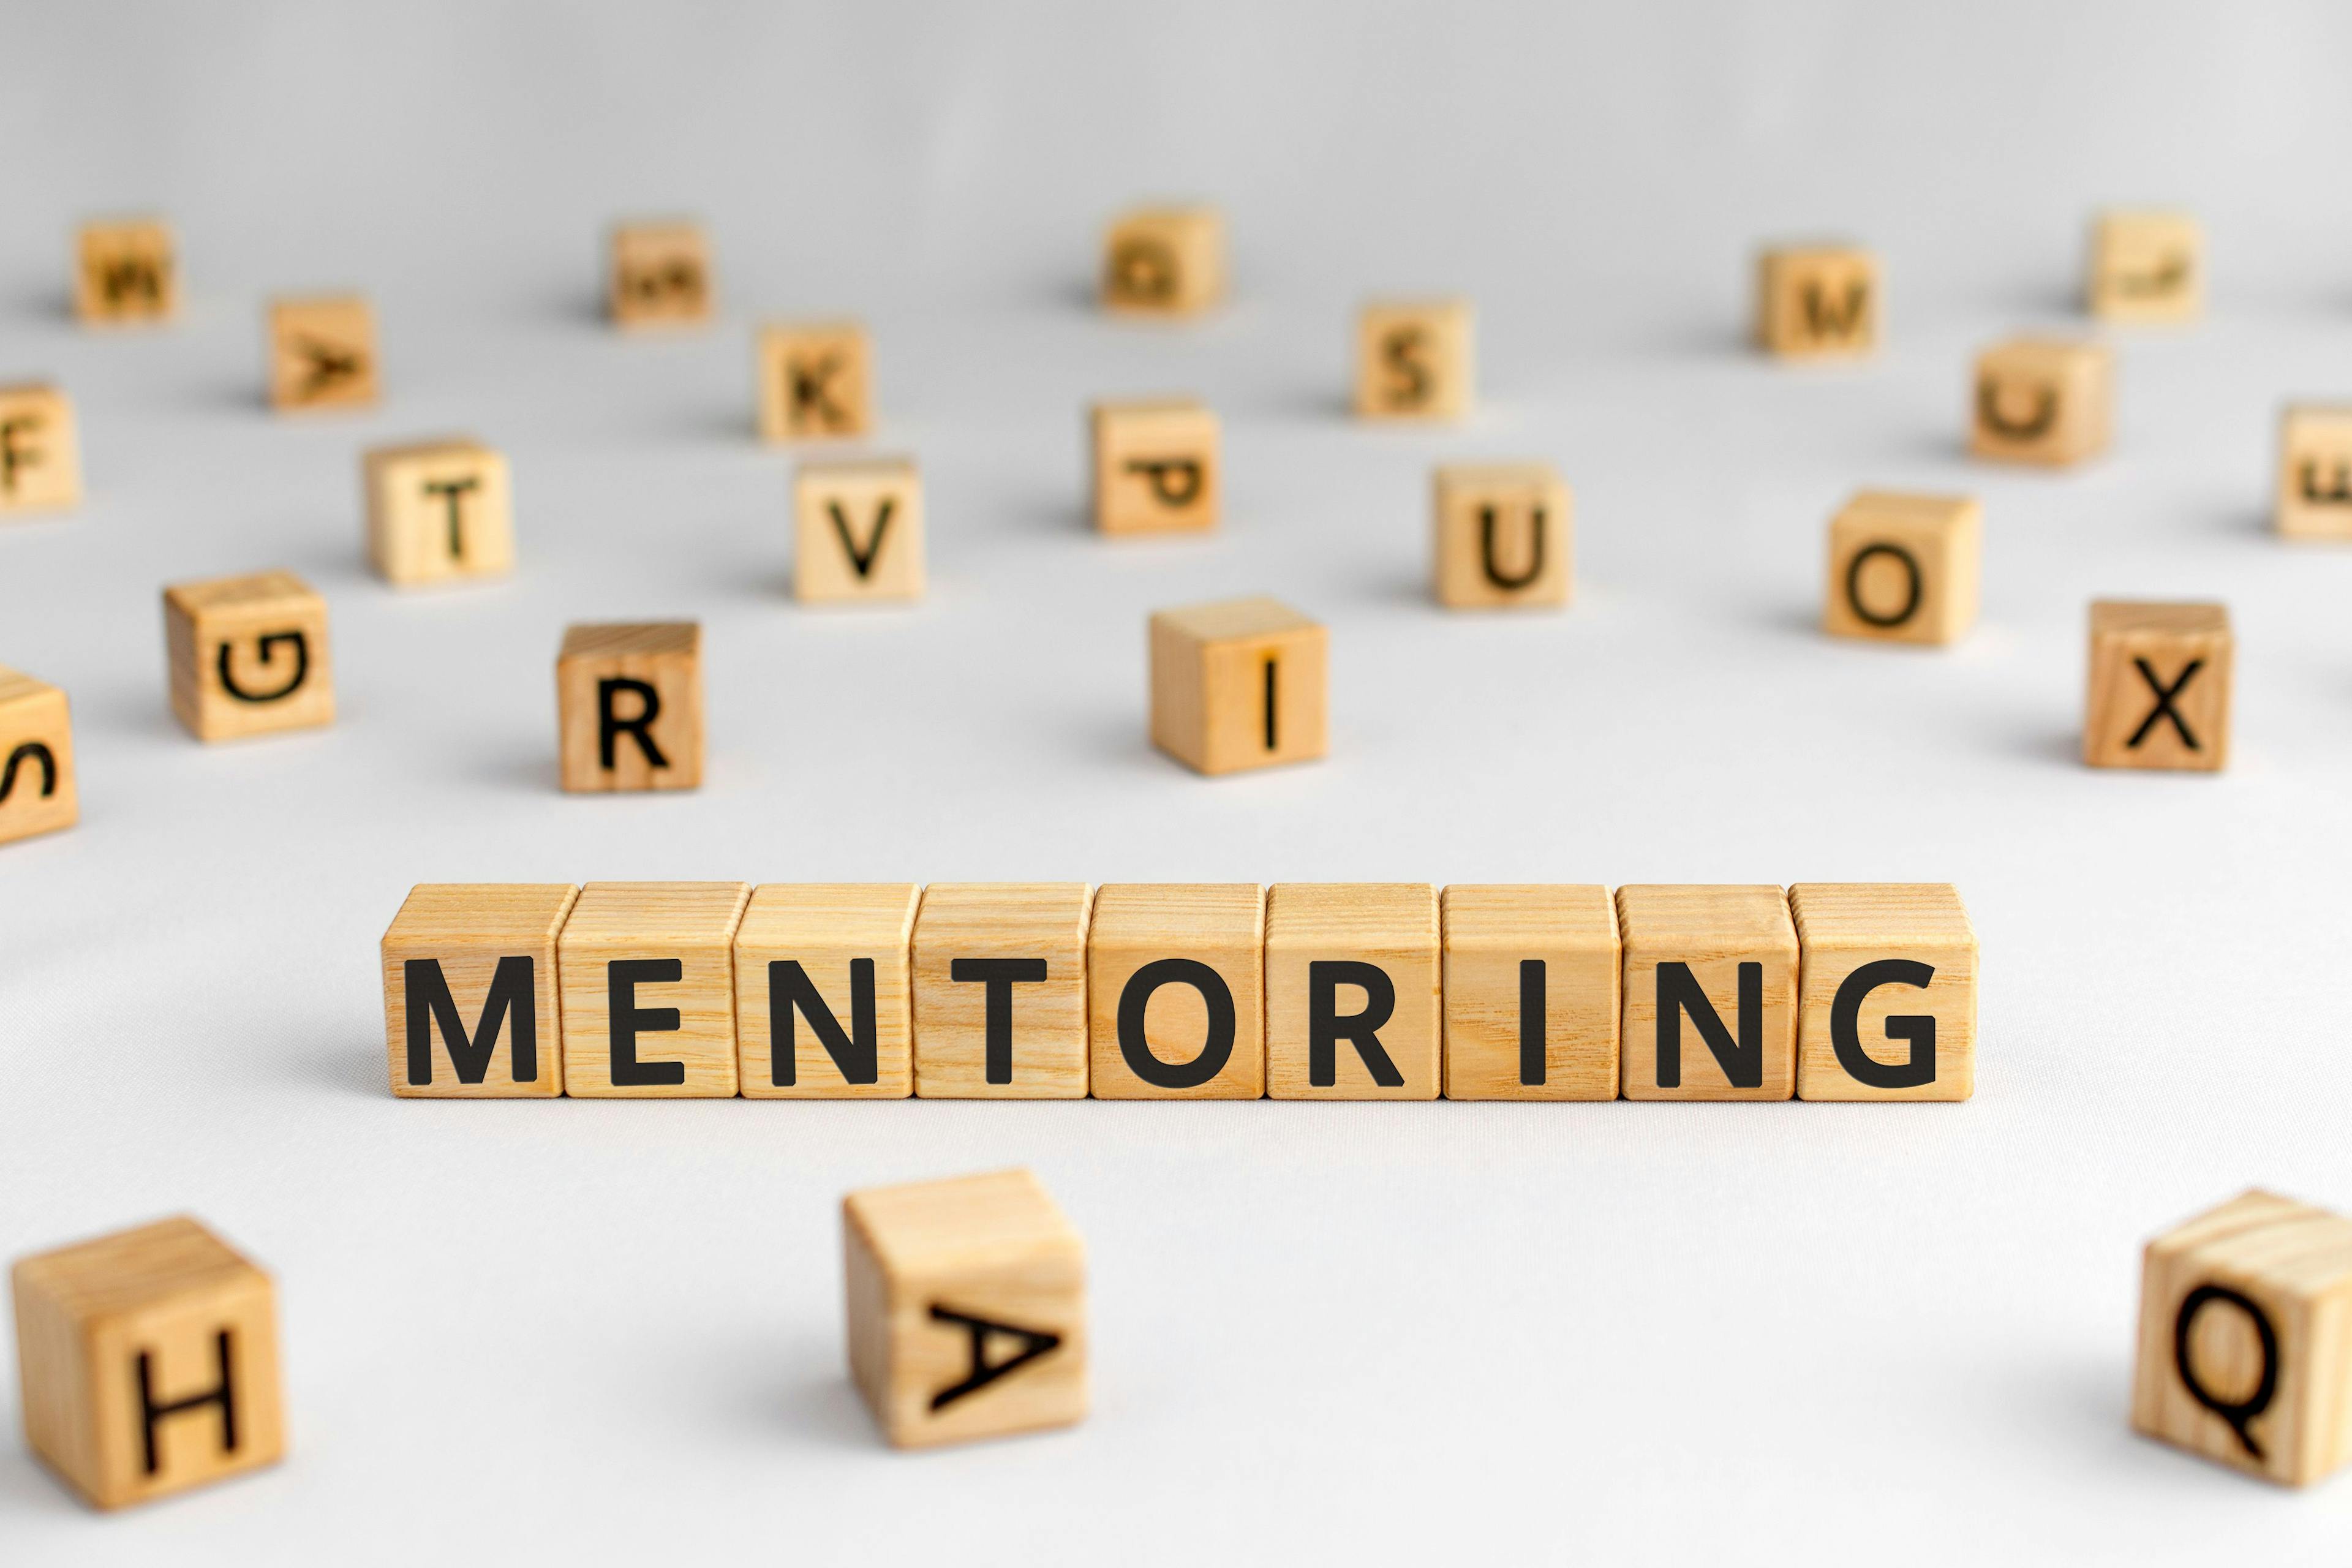 The true meaning of mentorship